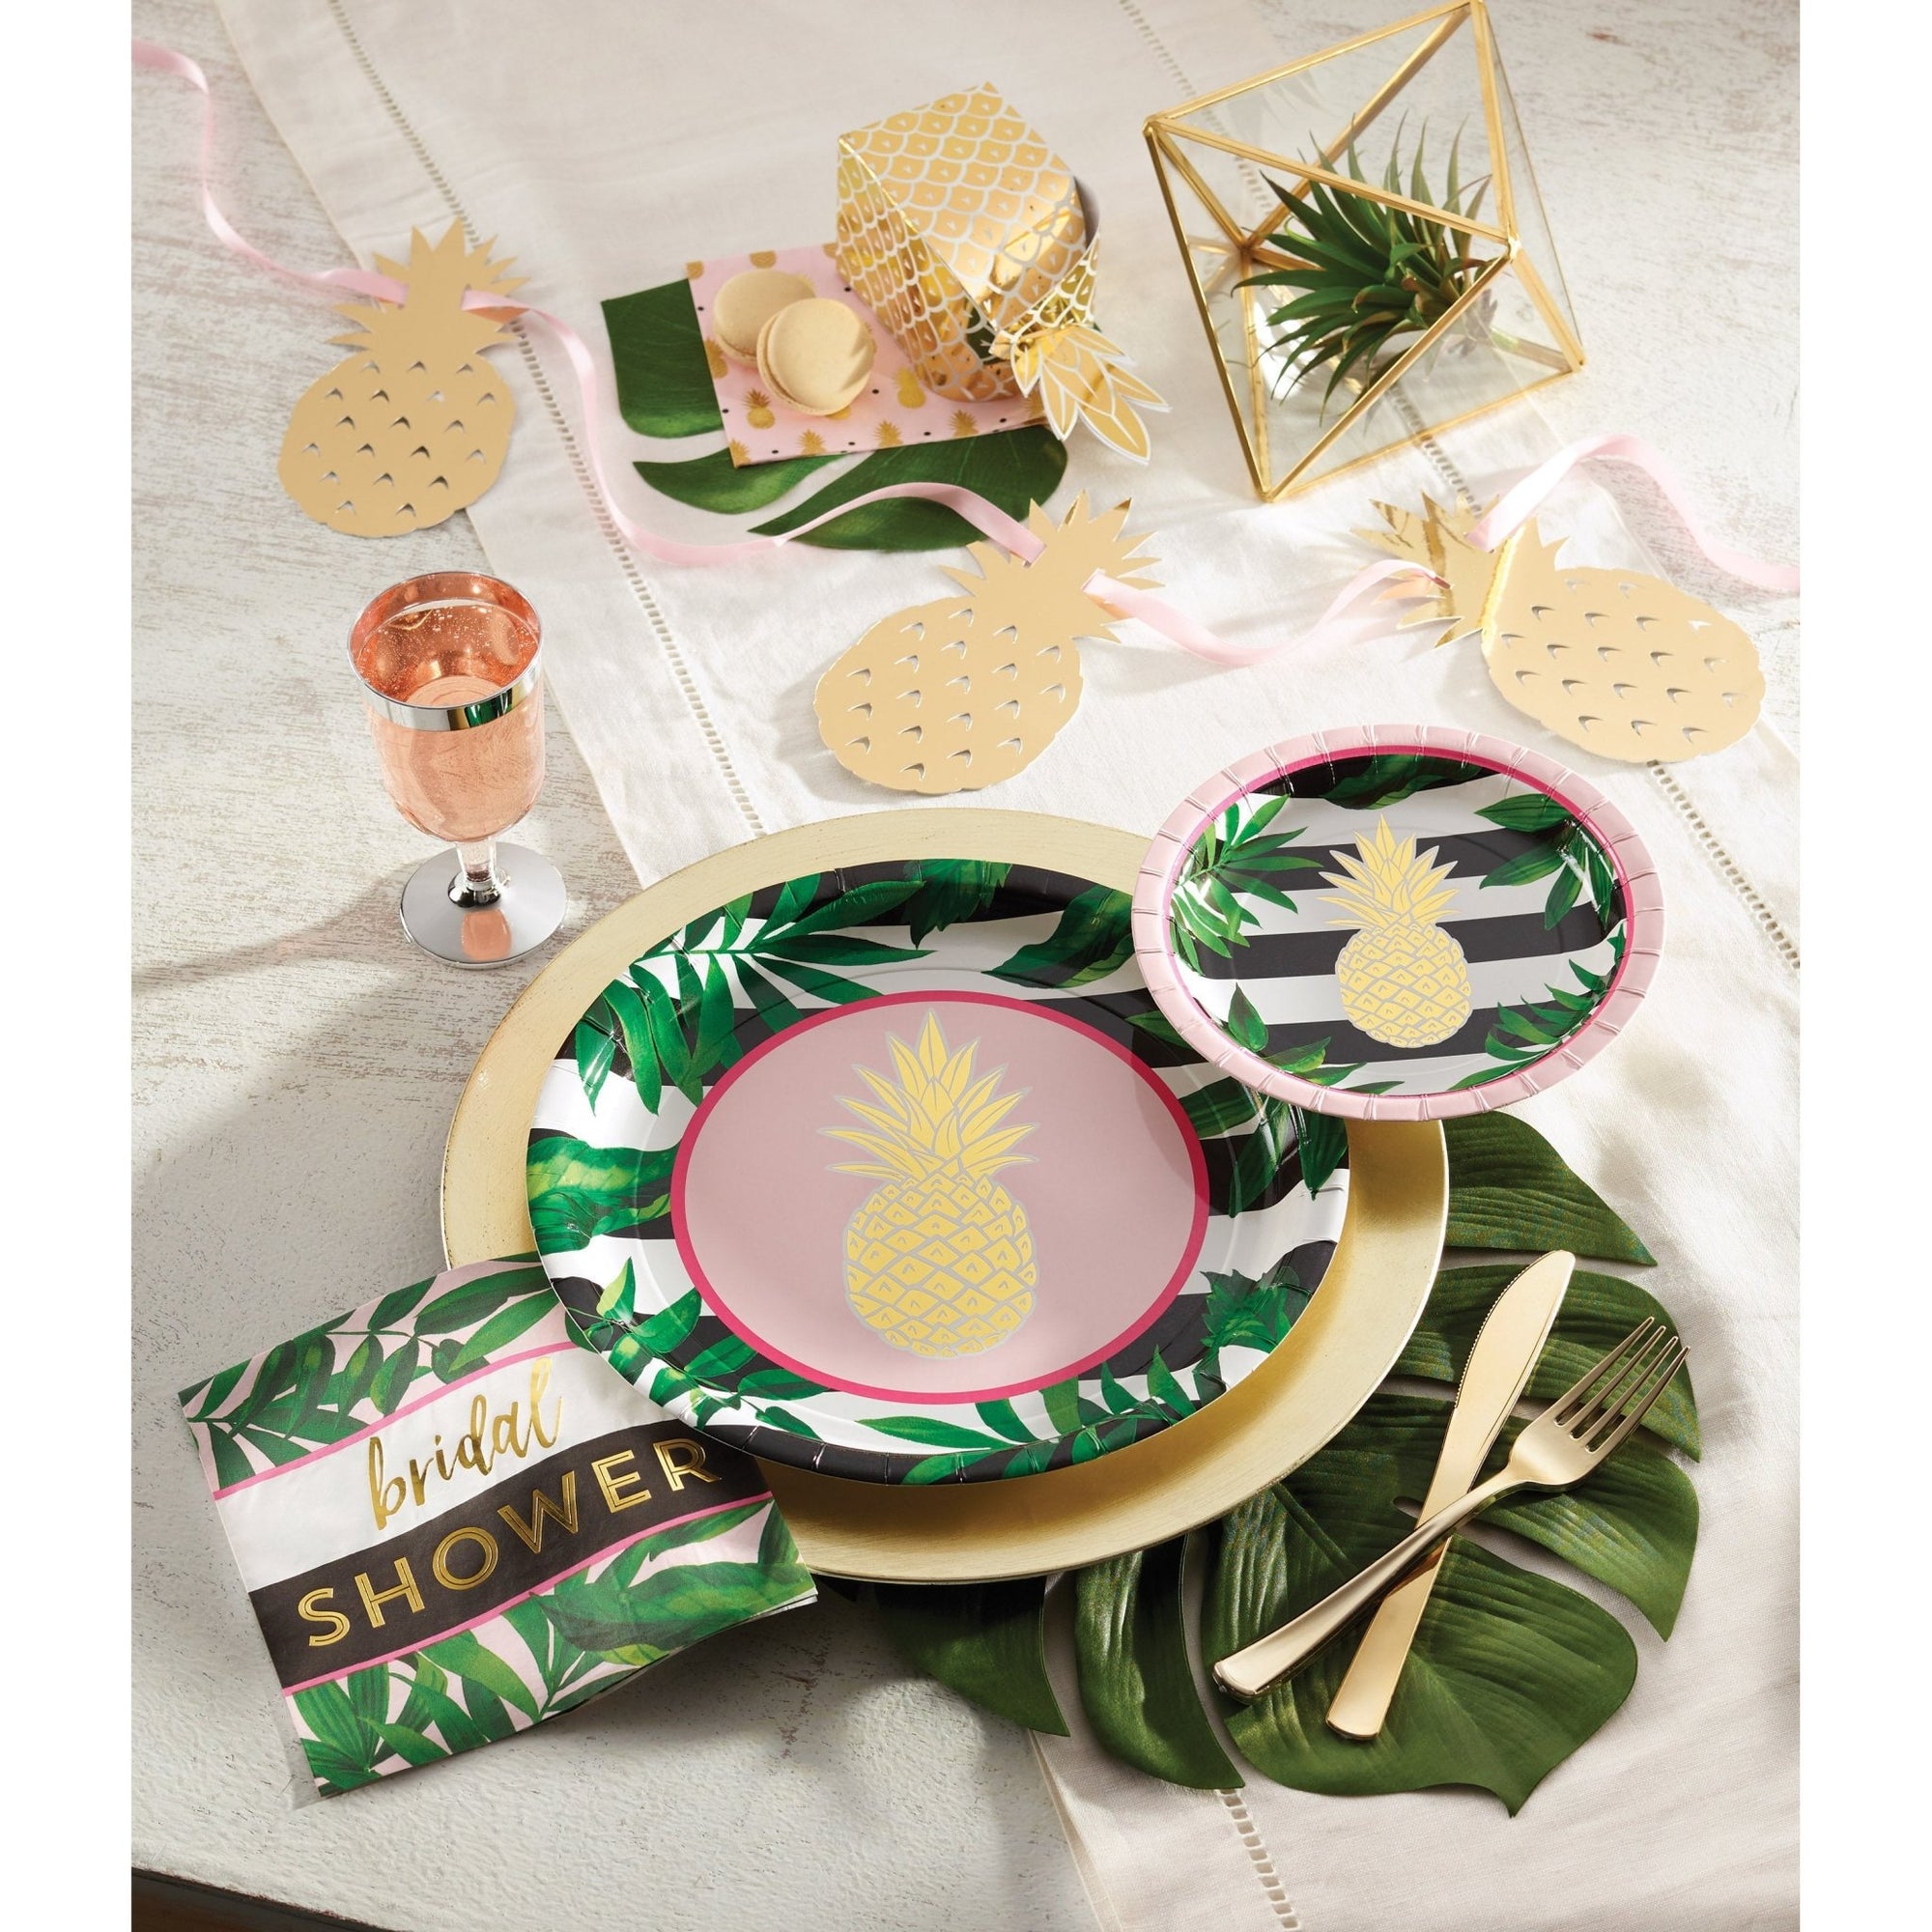 10" Tropical Gold Foil Pineapple Plates - Stesha Party